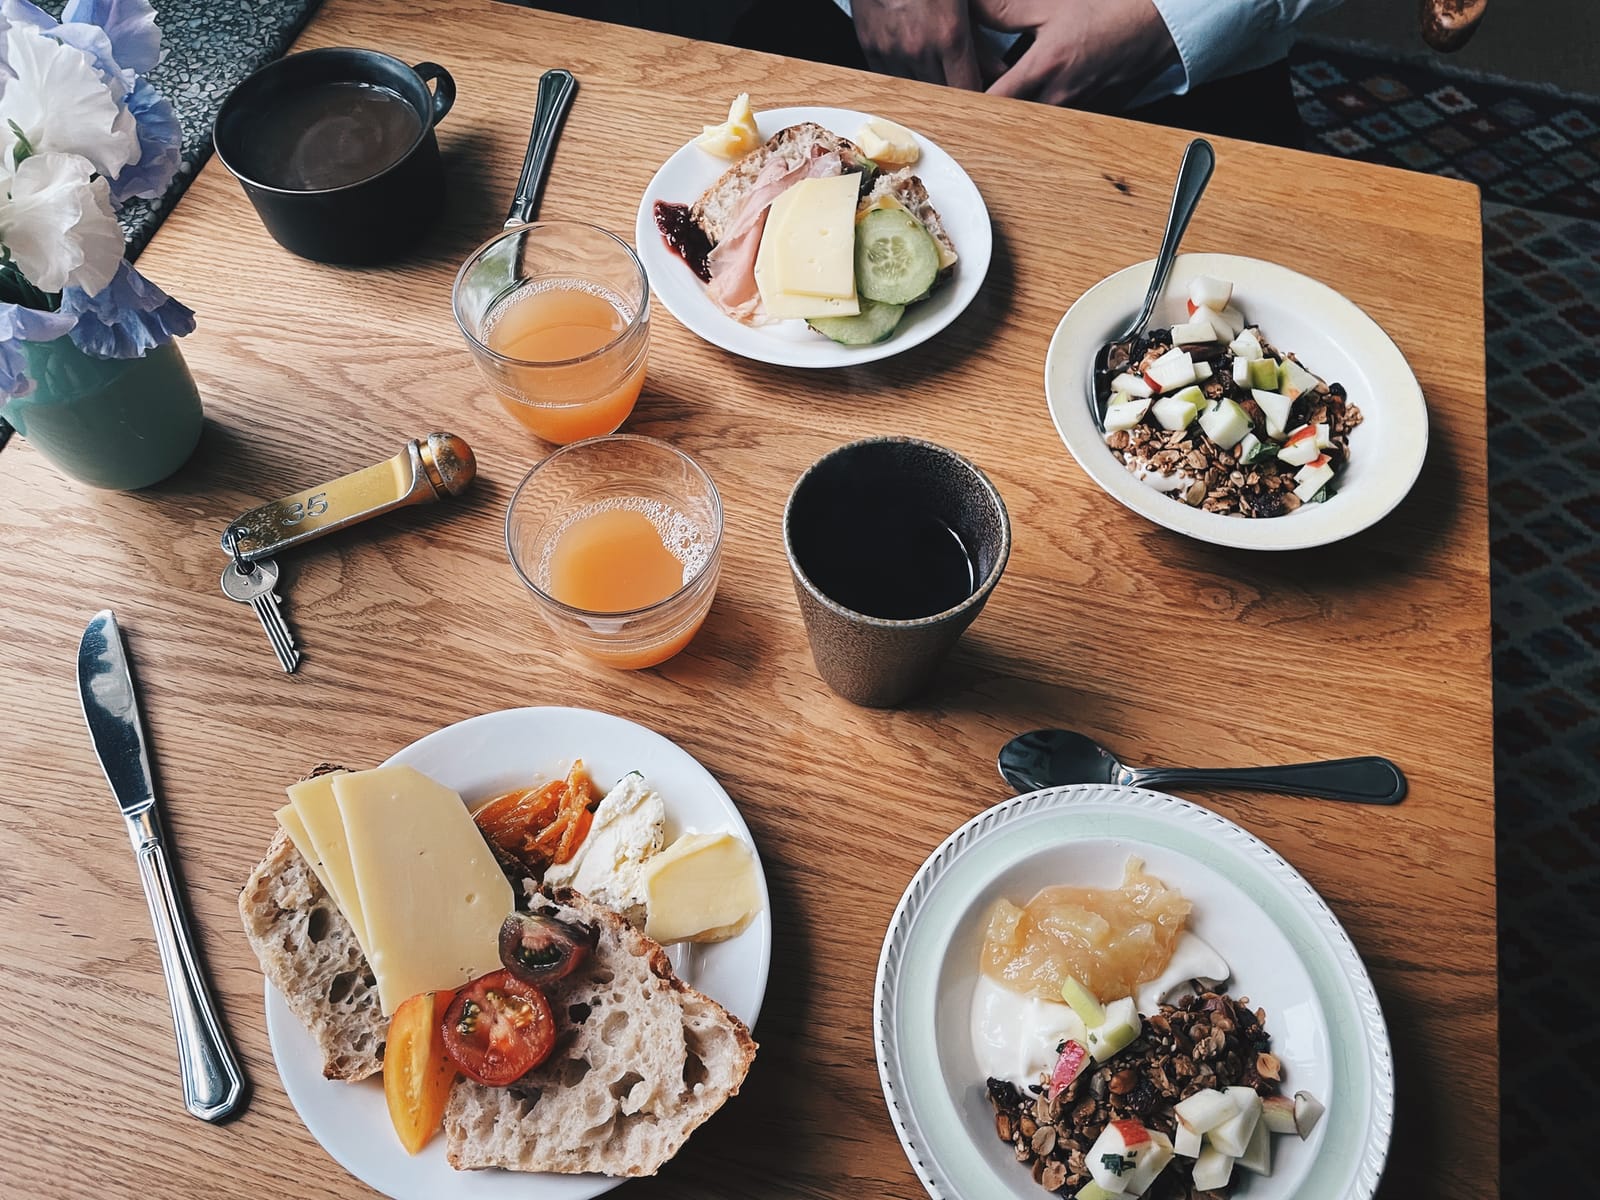 A bountiful breakfast table with coffee, apple juice, freshly baked bread, plenty of toppings, and homemade muesli.